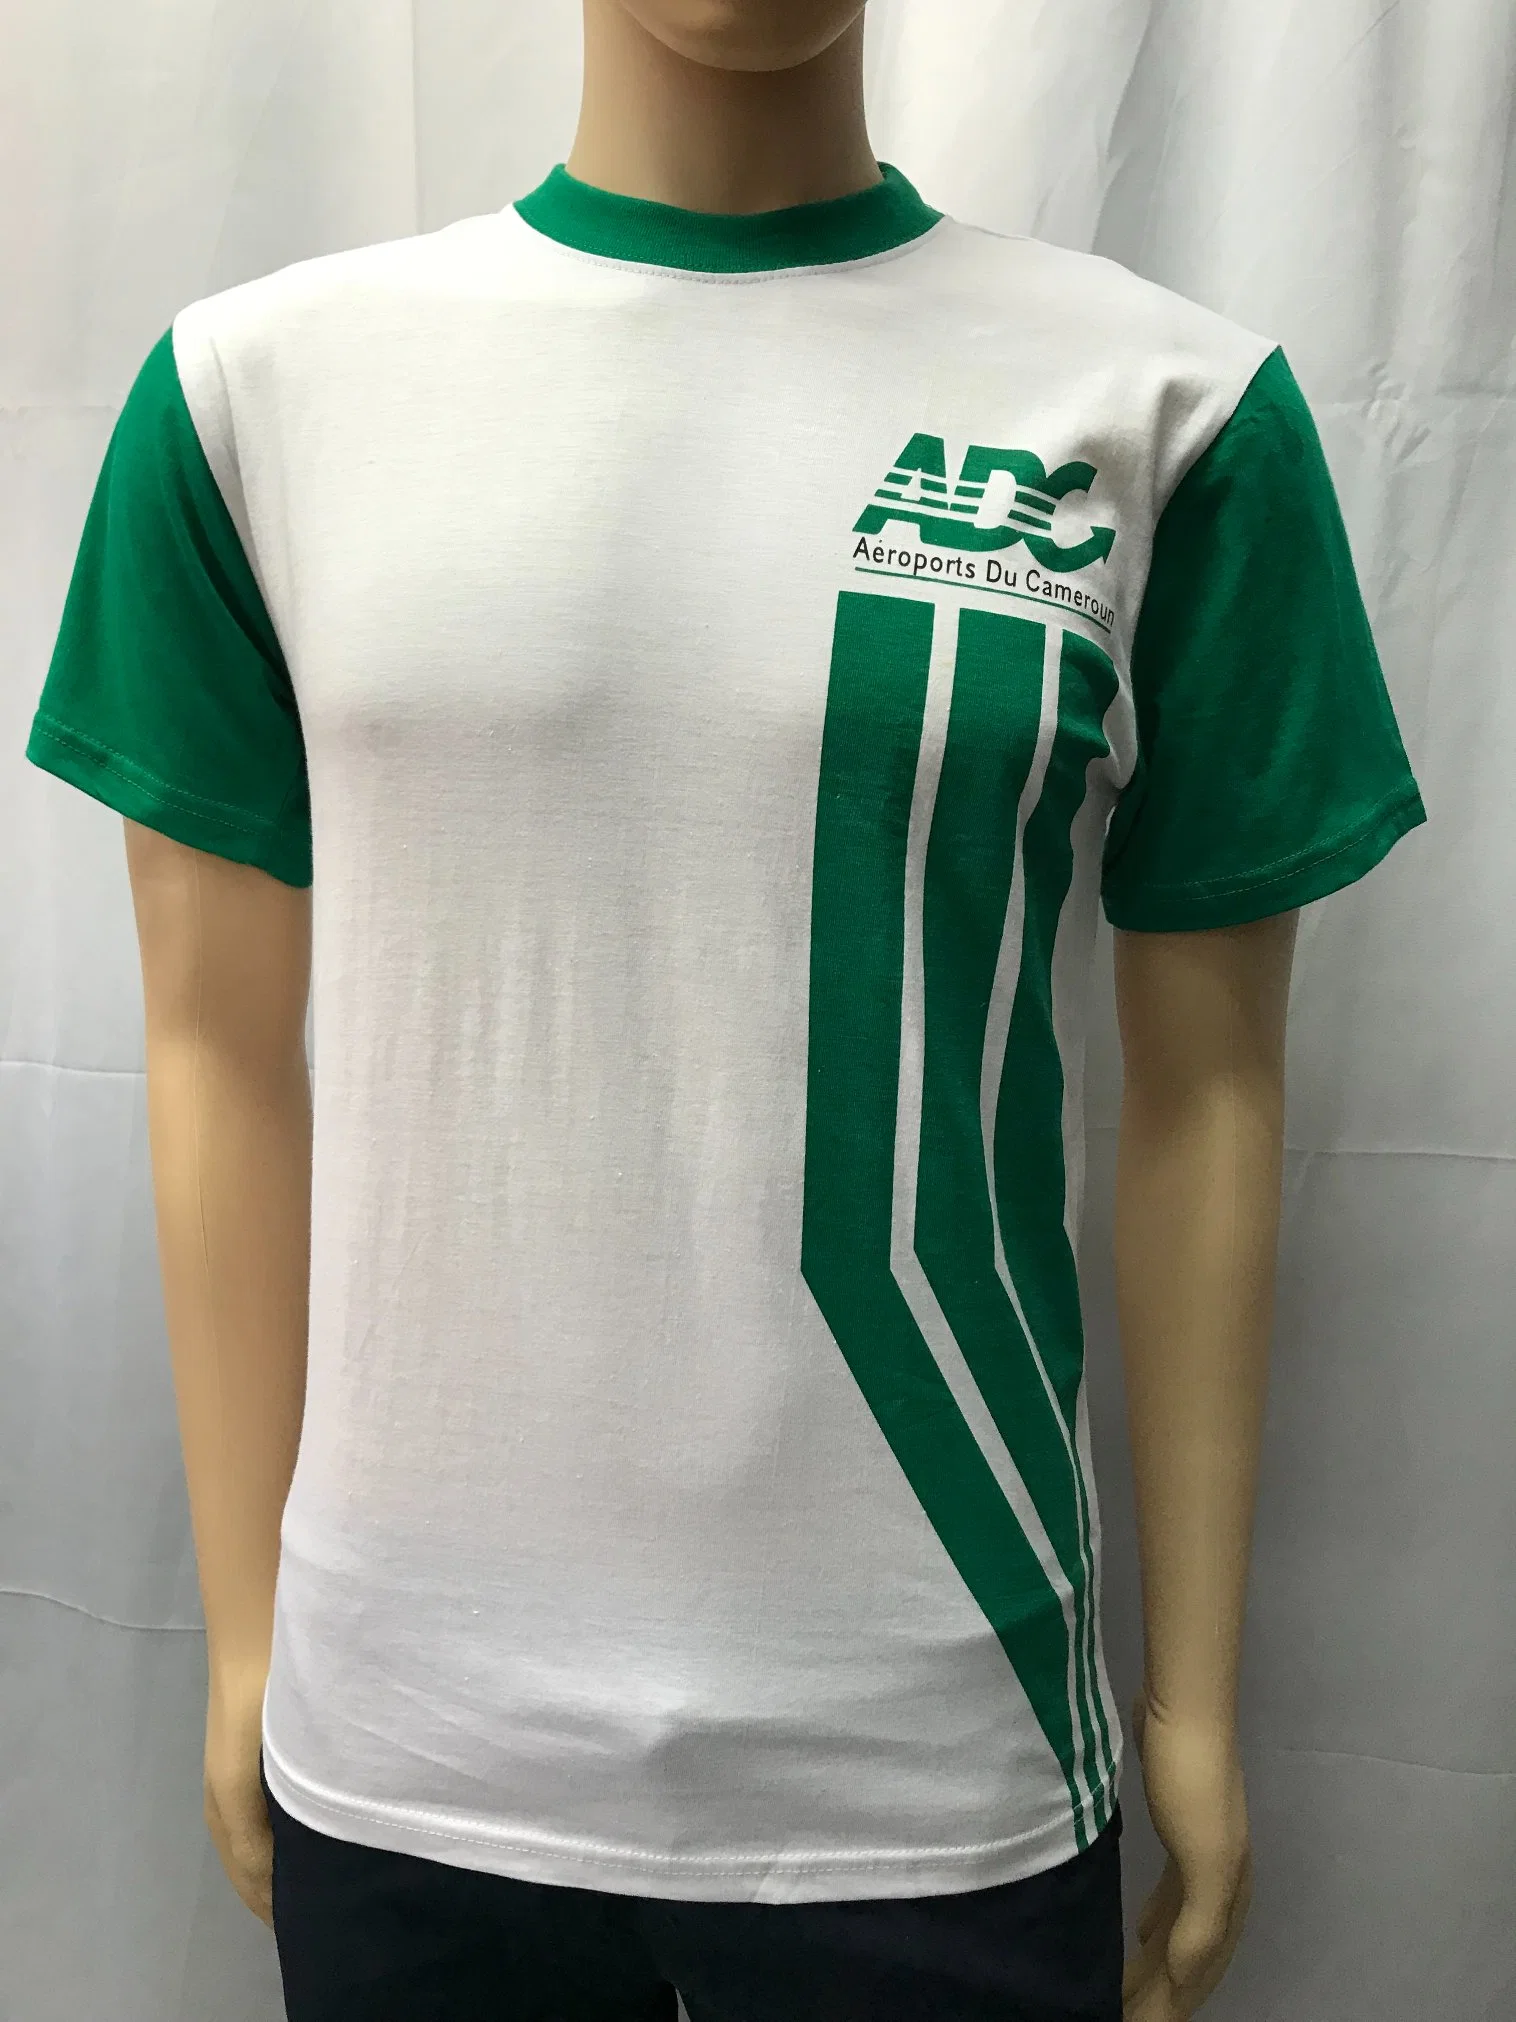 Top Quality Cotton Printing T-Shirt for Advertising